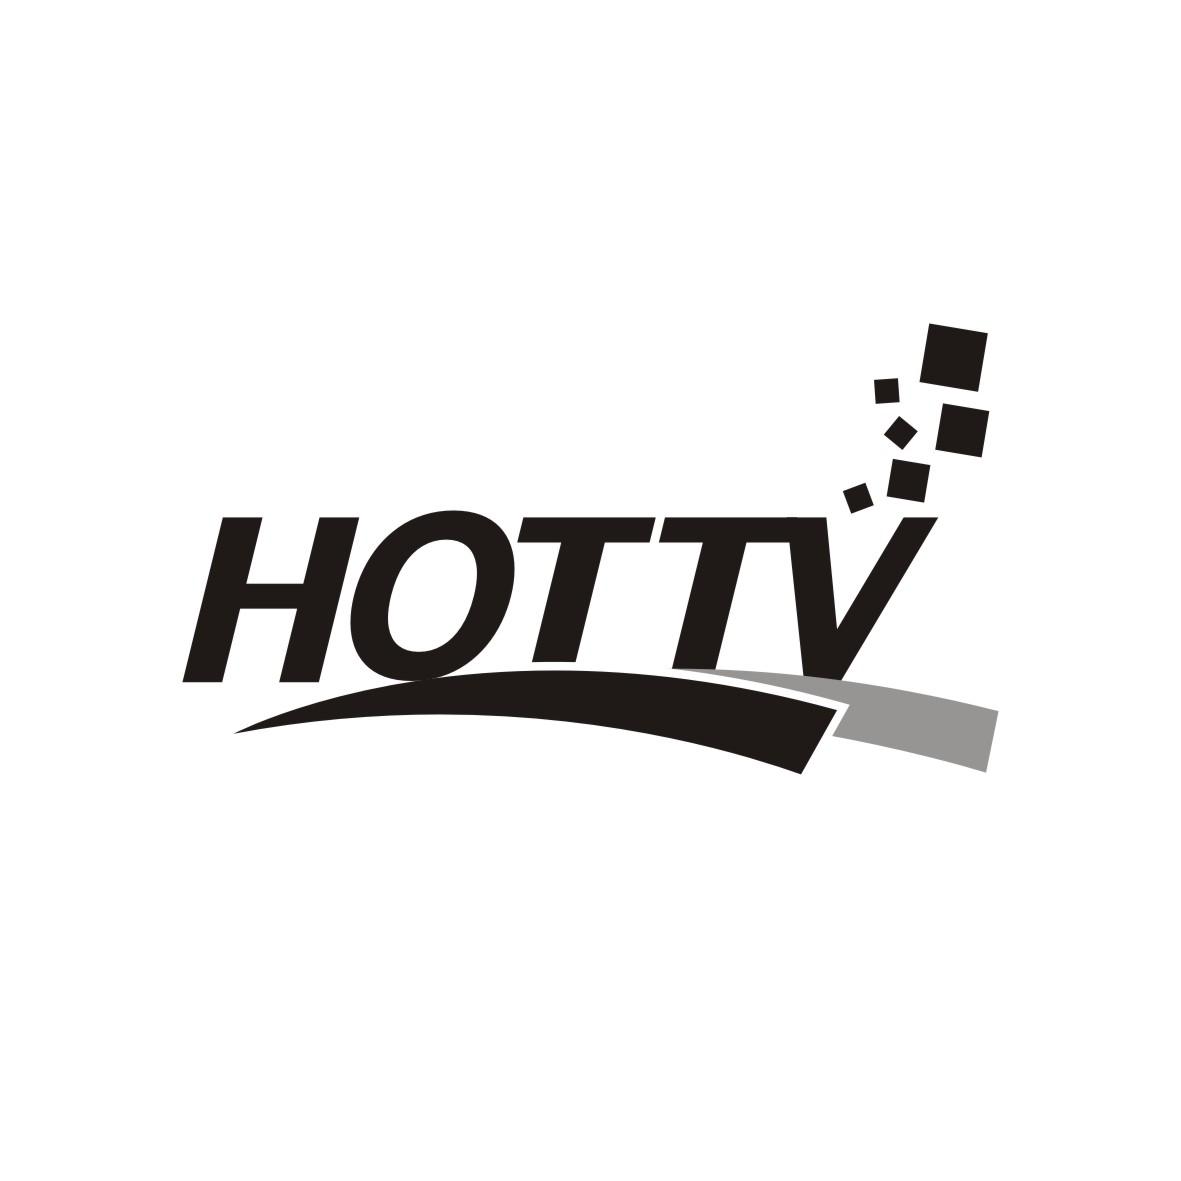 HOTTV